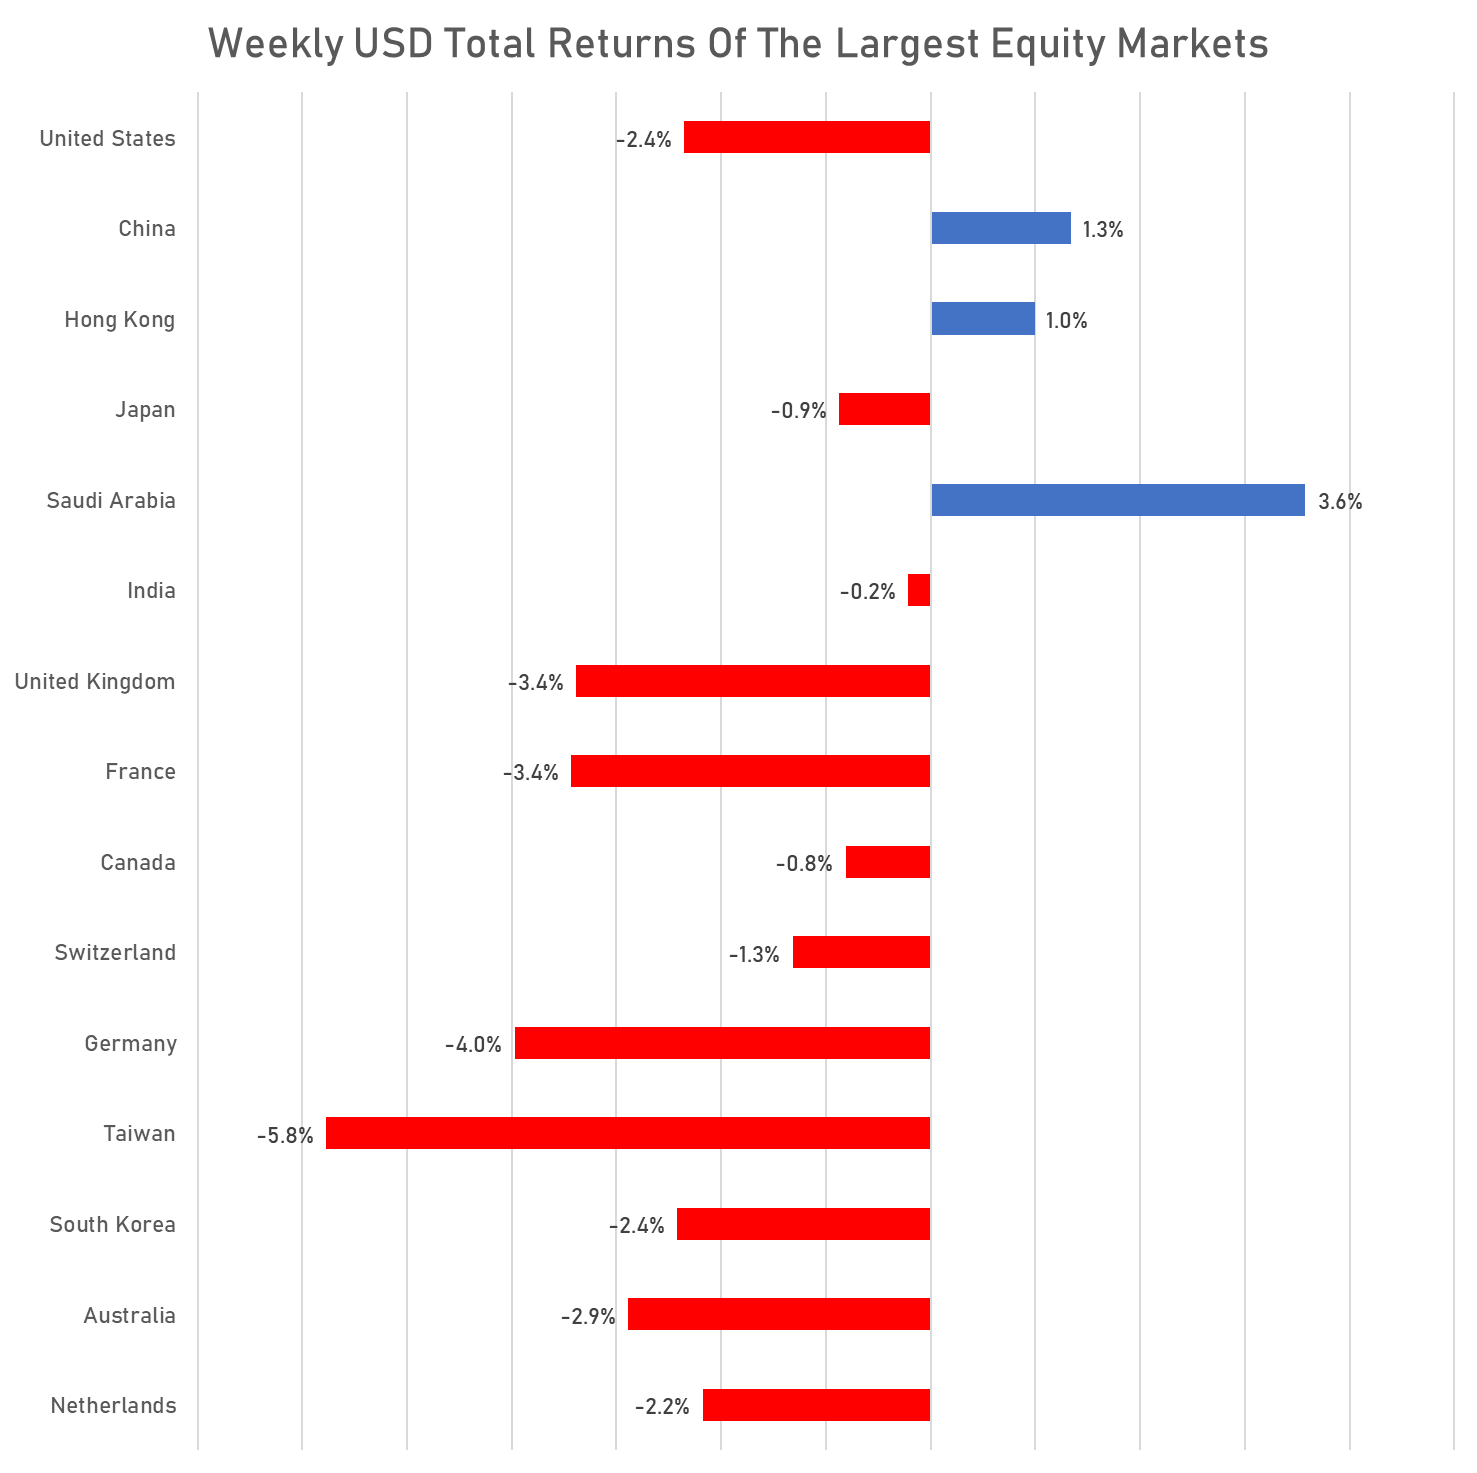 Weekly Performance of the largest global equity markets | Sources: phipost.com, FactSet data